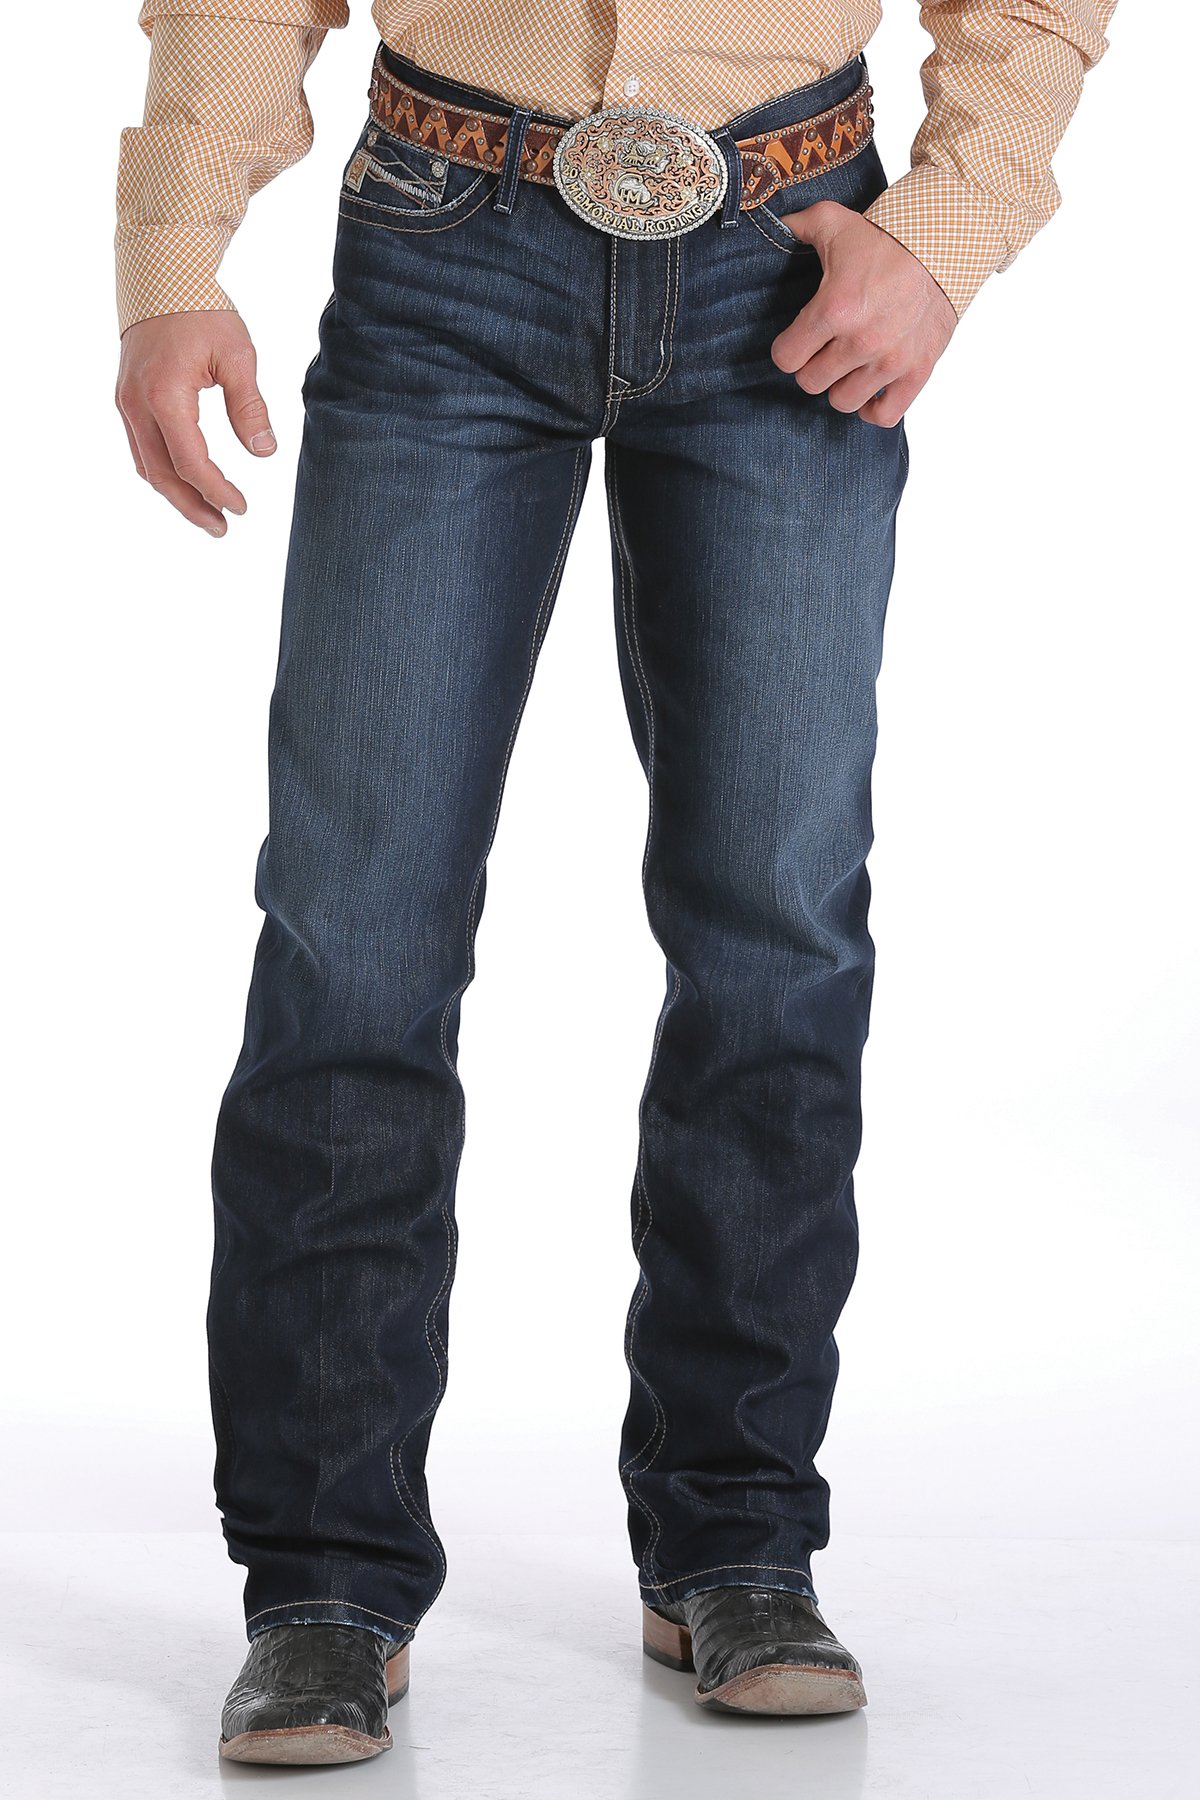 cinch jeans mens relaxed fit march grant jeans - dark stonewash BHUHWKJ